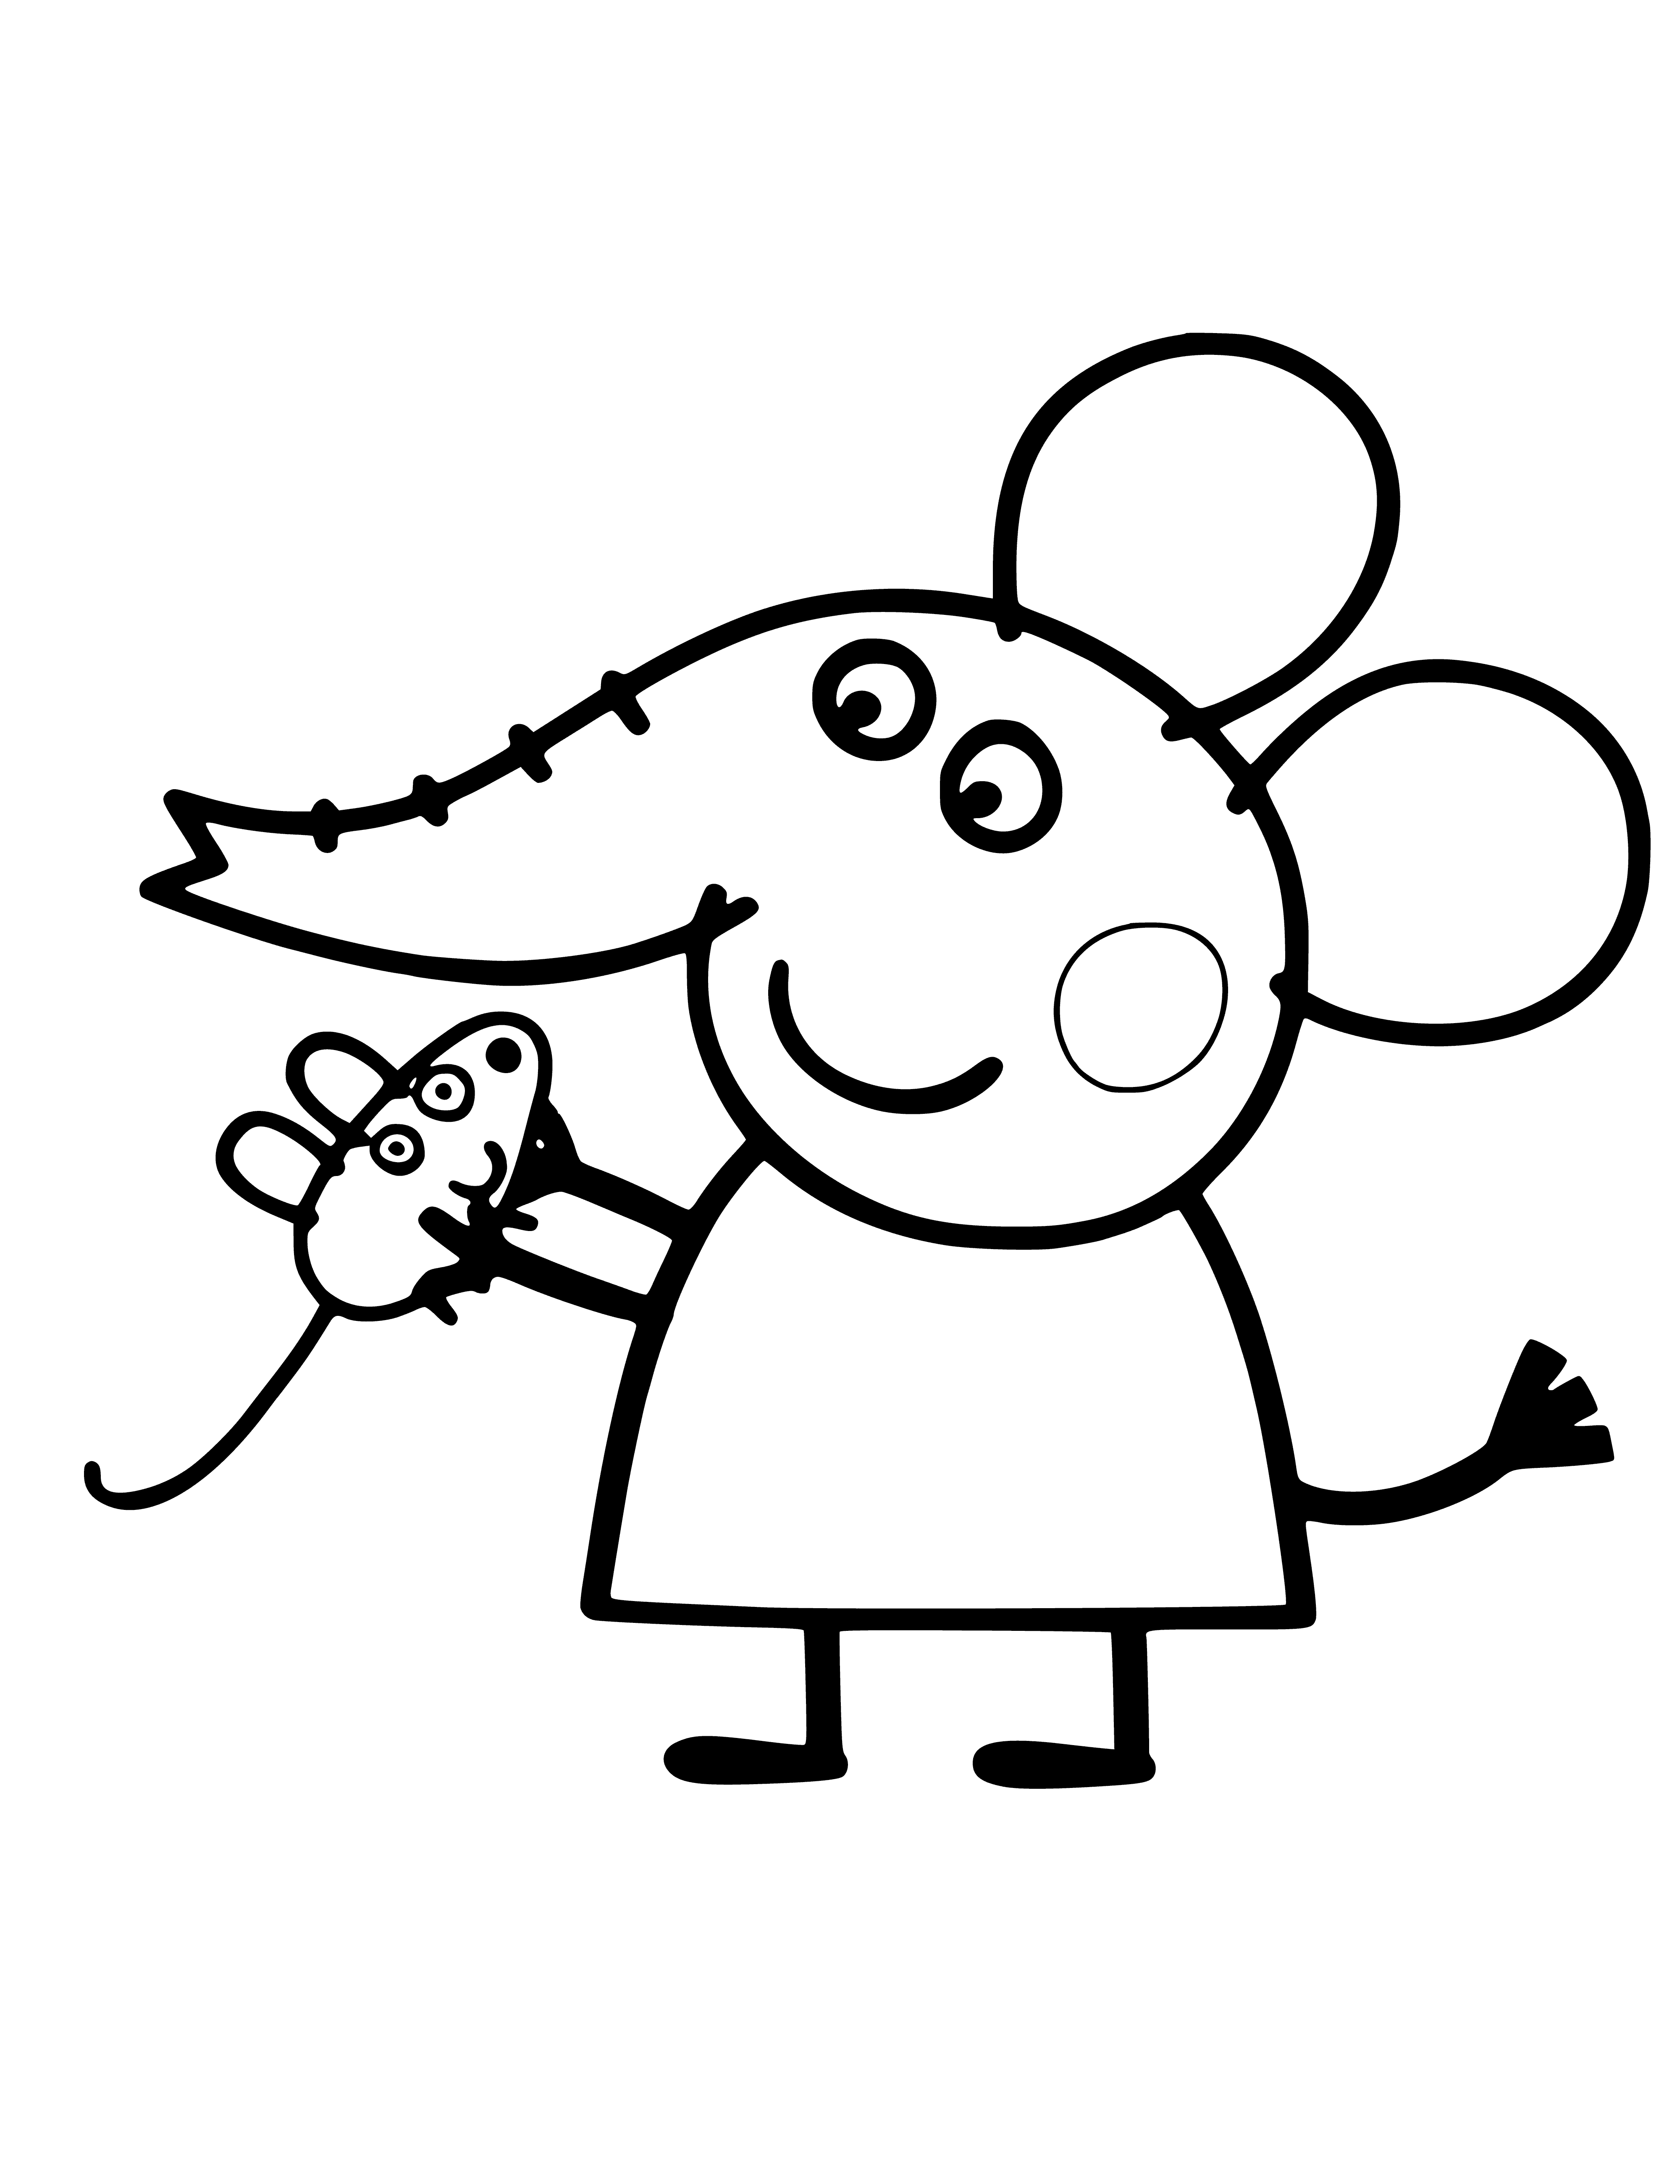 Emily the baby elephant with a mouse coloring page